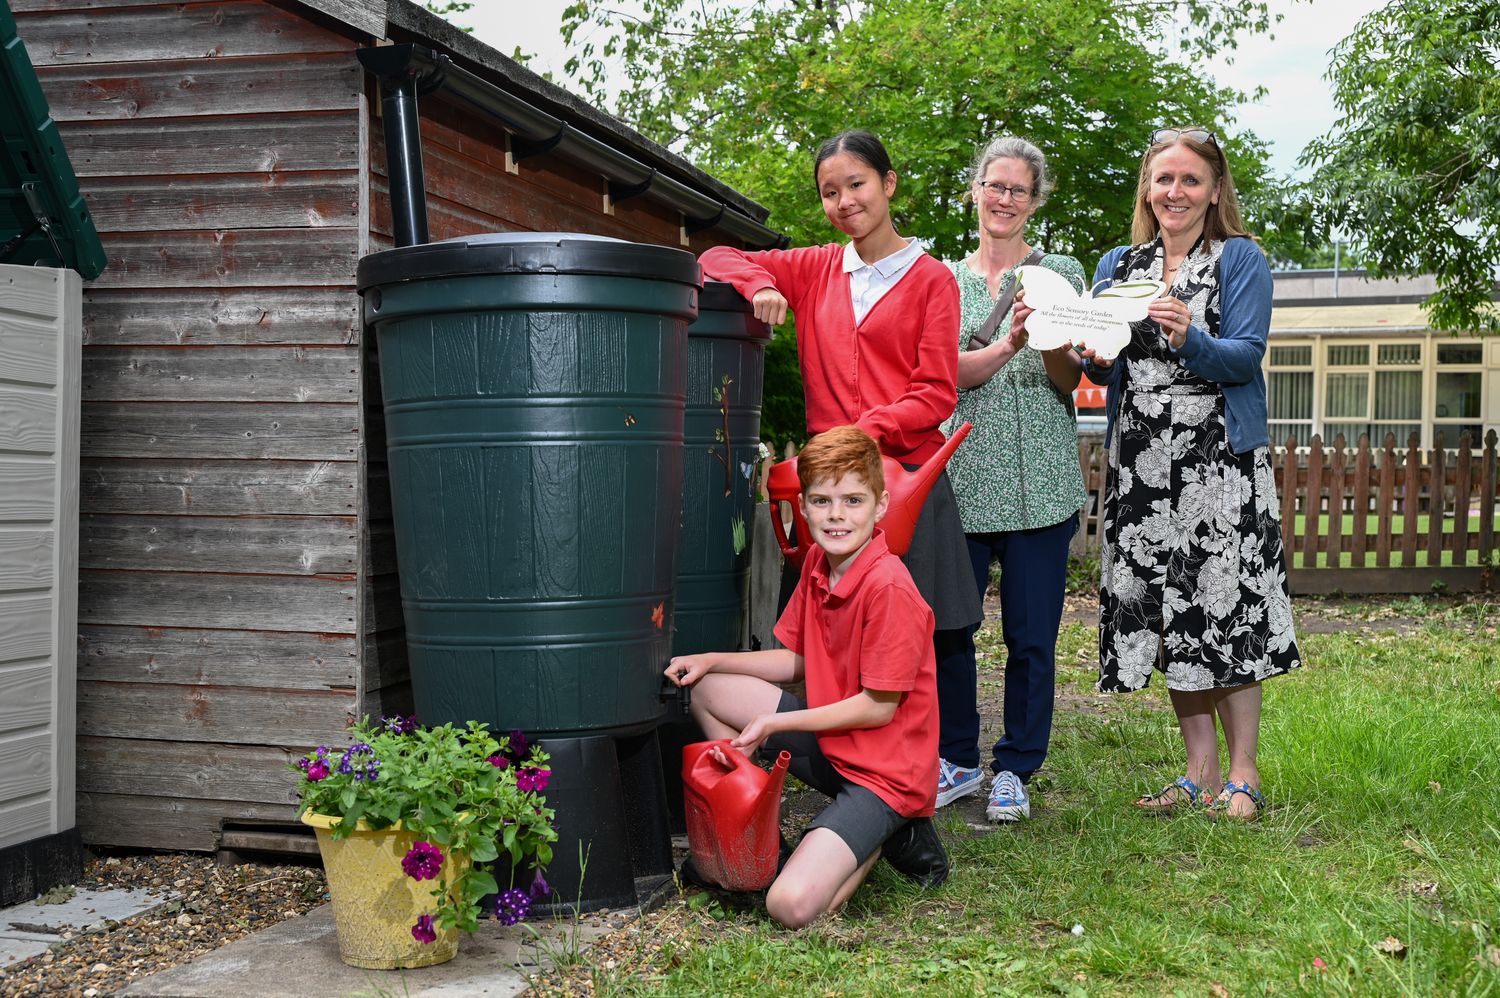 School children and teachers posing with watering cans and water butts